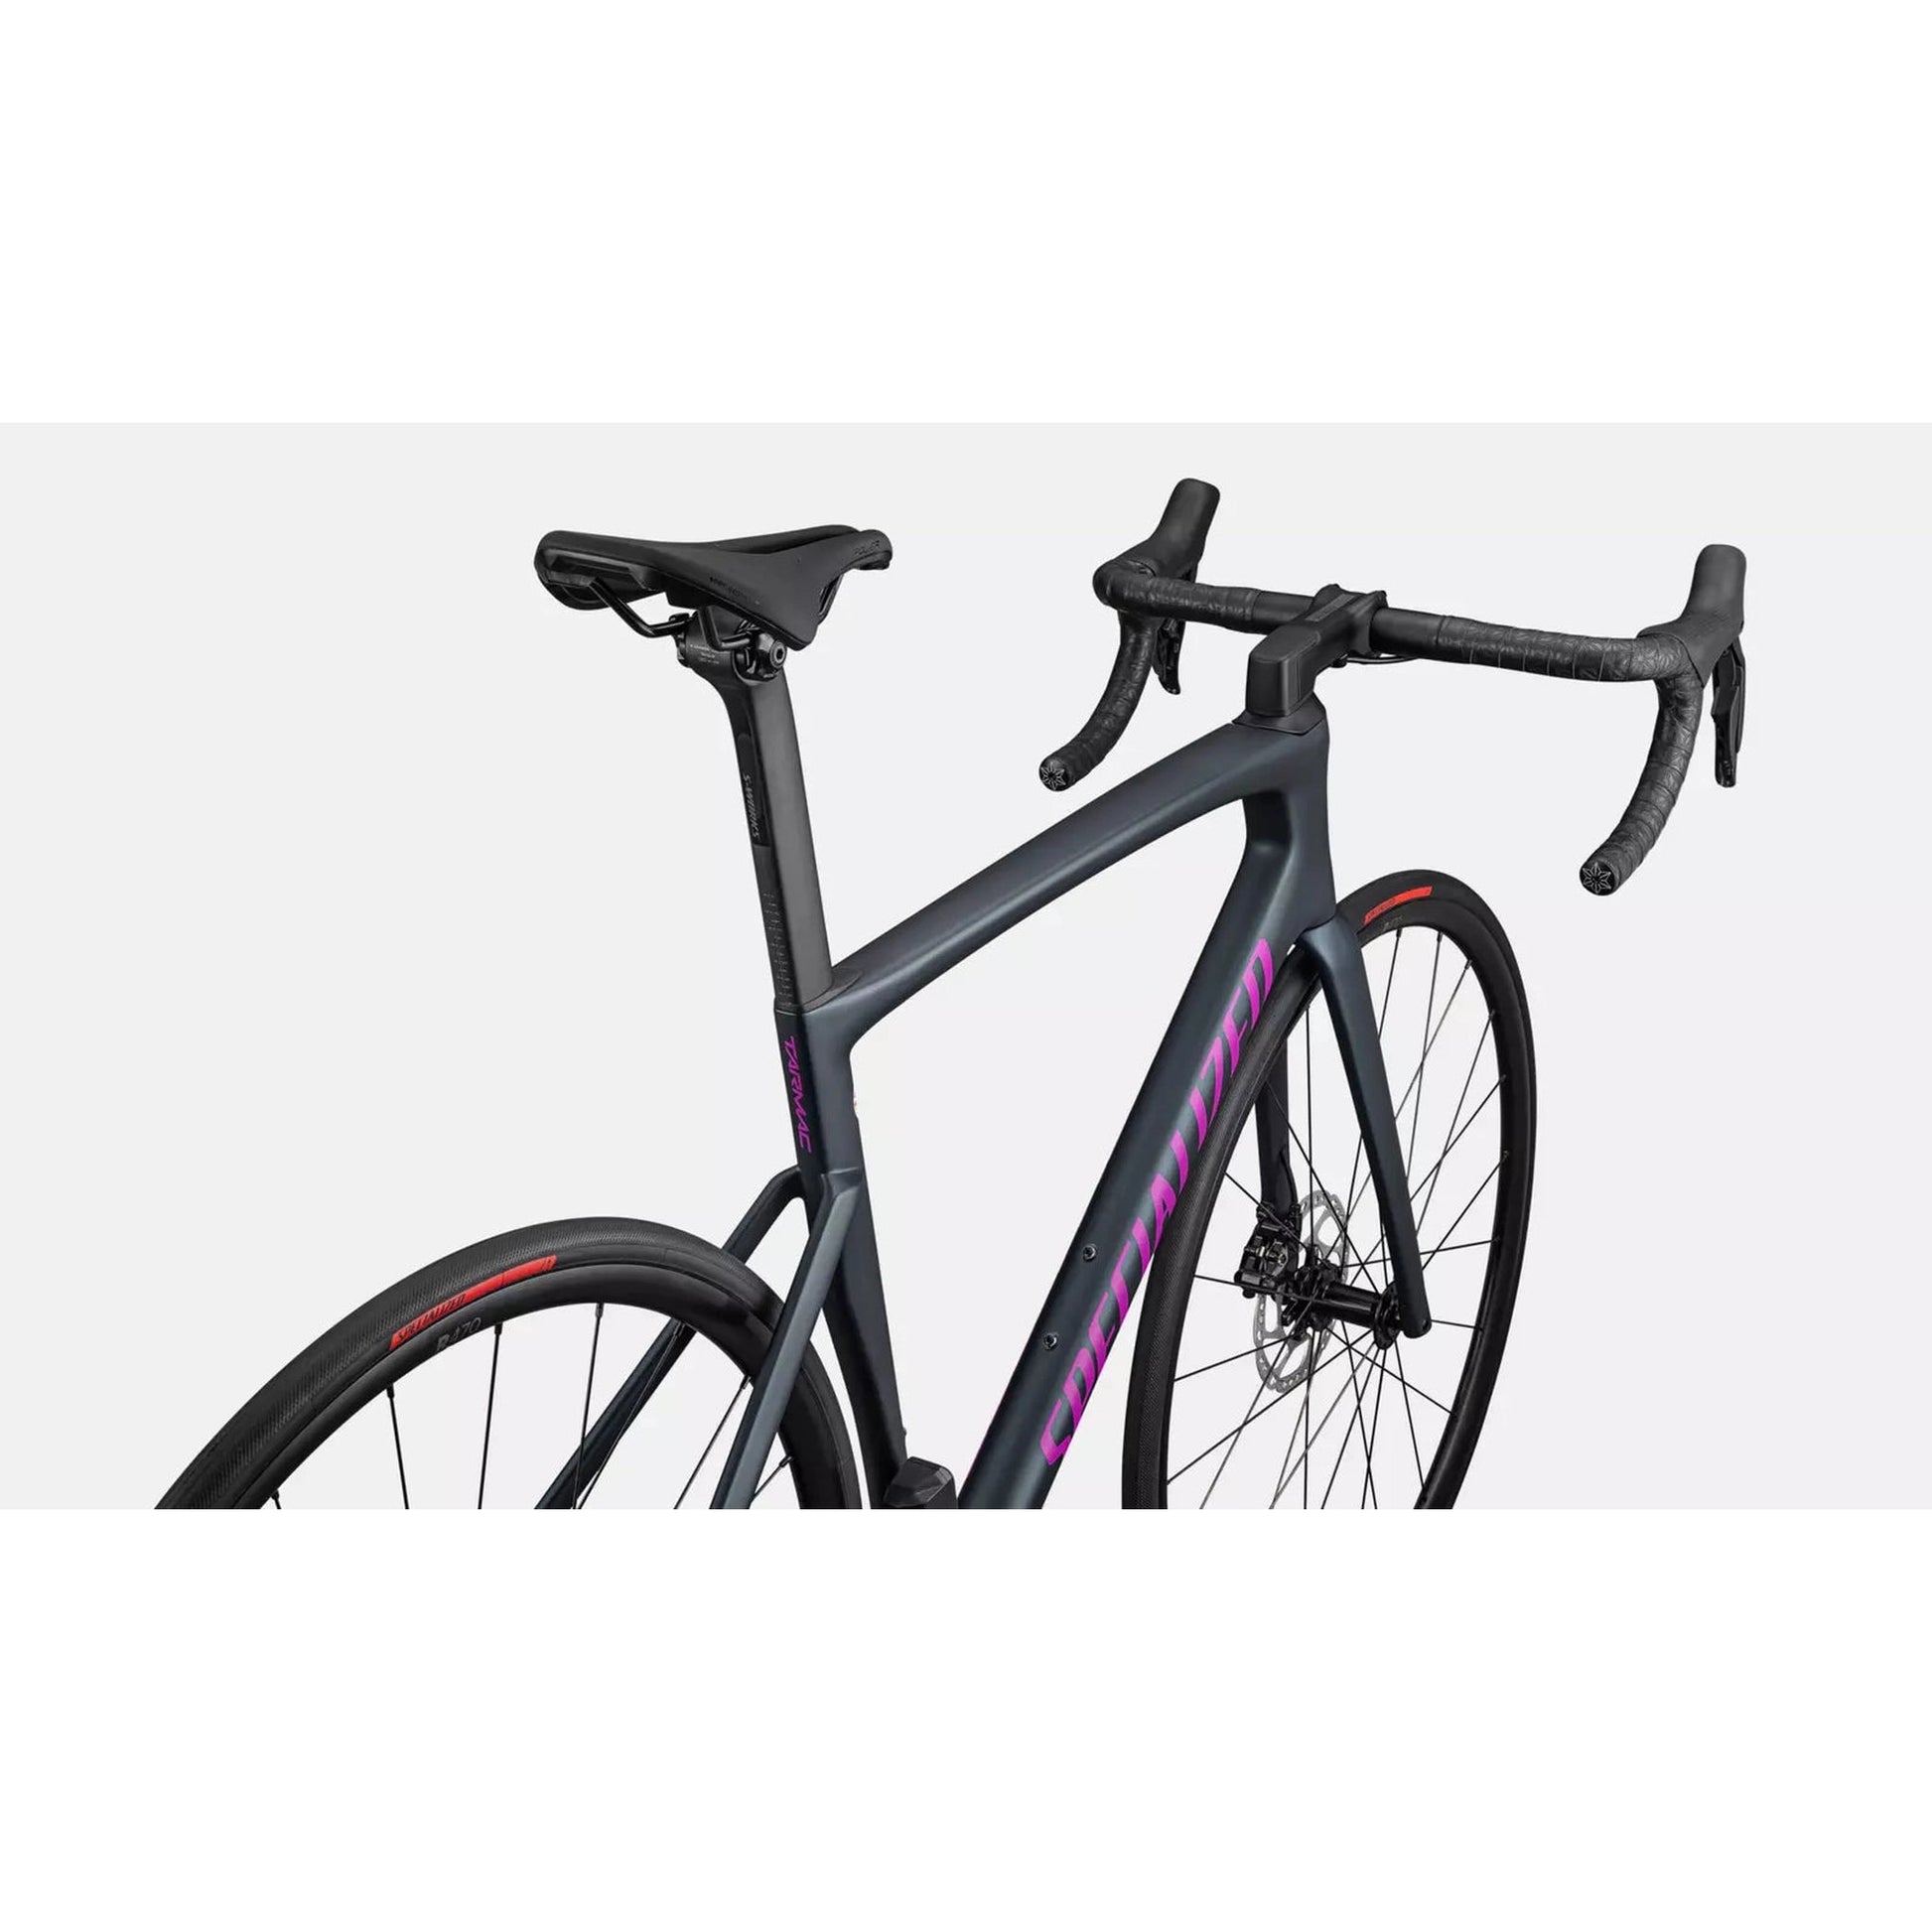 Tarmac SL7 Comp -Shimano 105 Di2-Cycles Direct Specialized